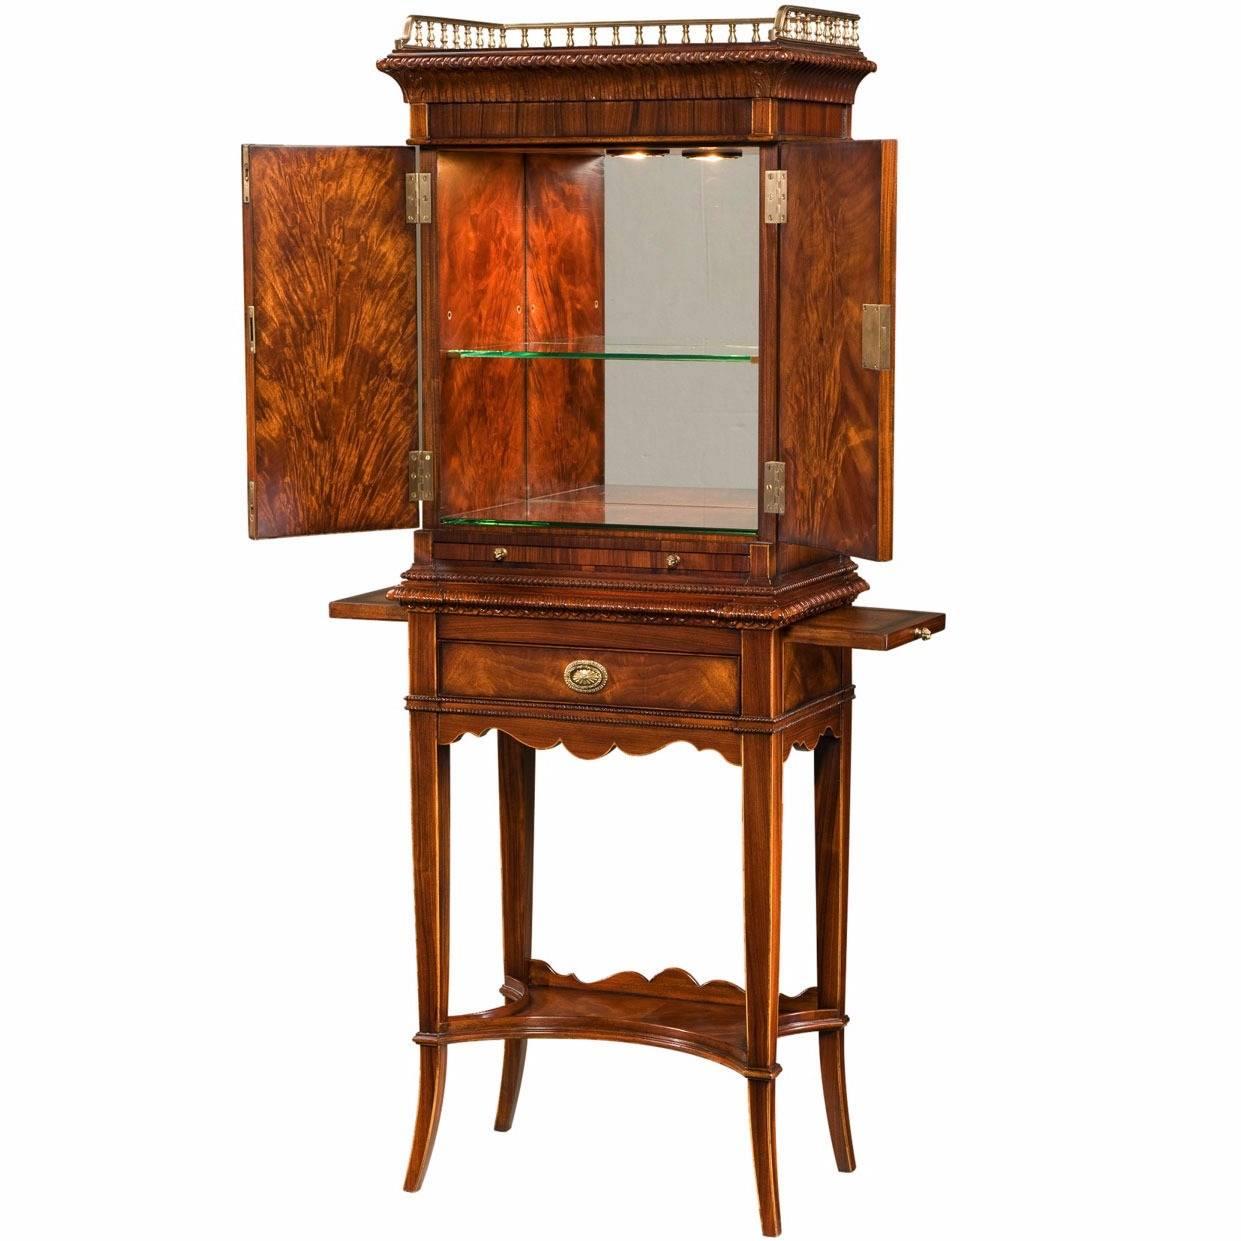 A George III style mahogany and rosewood cocktail cabinet with panelled doors and slides below. The stand has a drawer, undertier and splayed legs. The interior has mirrored back, glass shelves and 3 stage touch light. The original 1800.